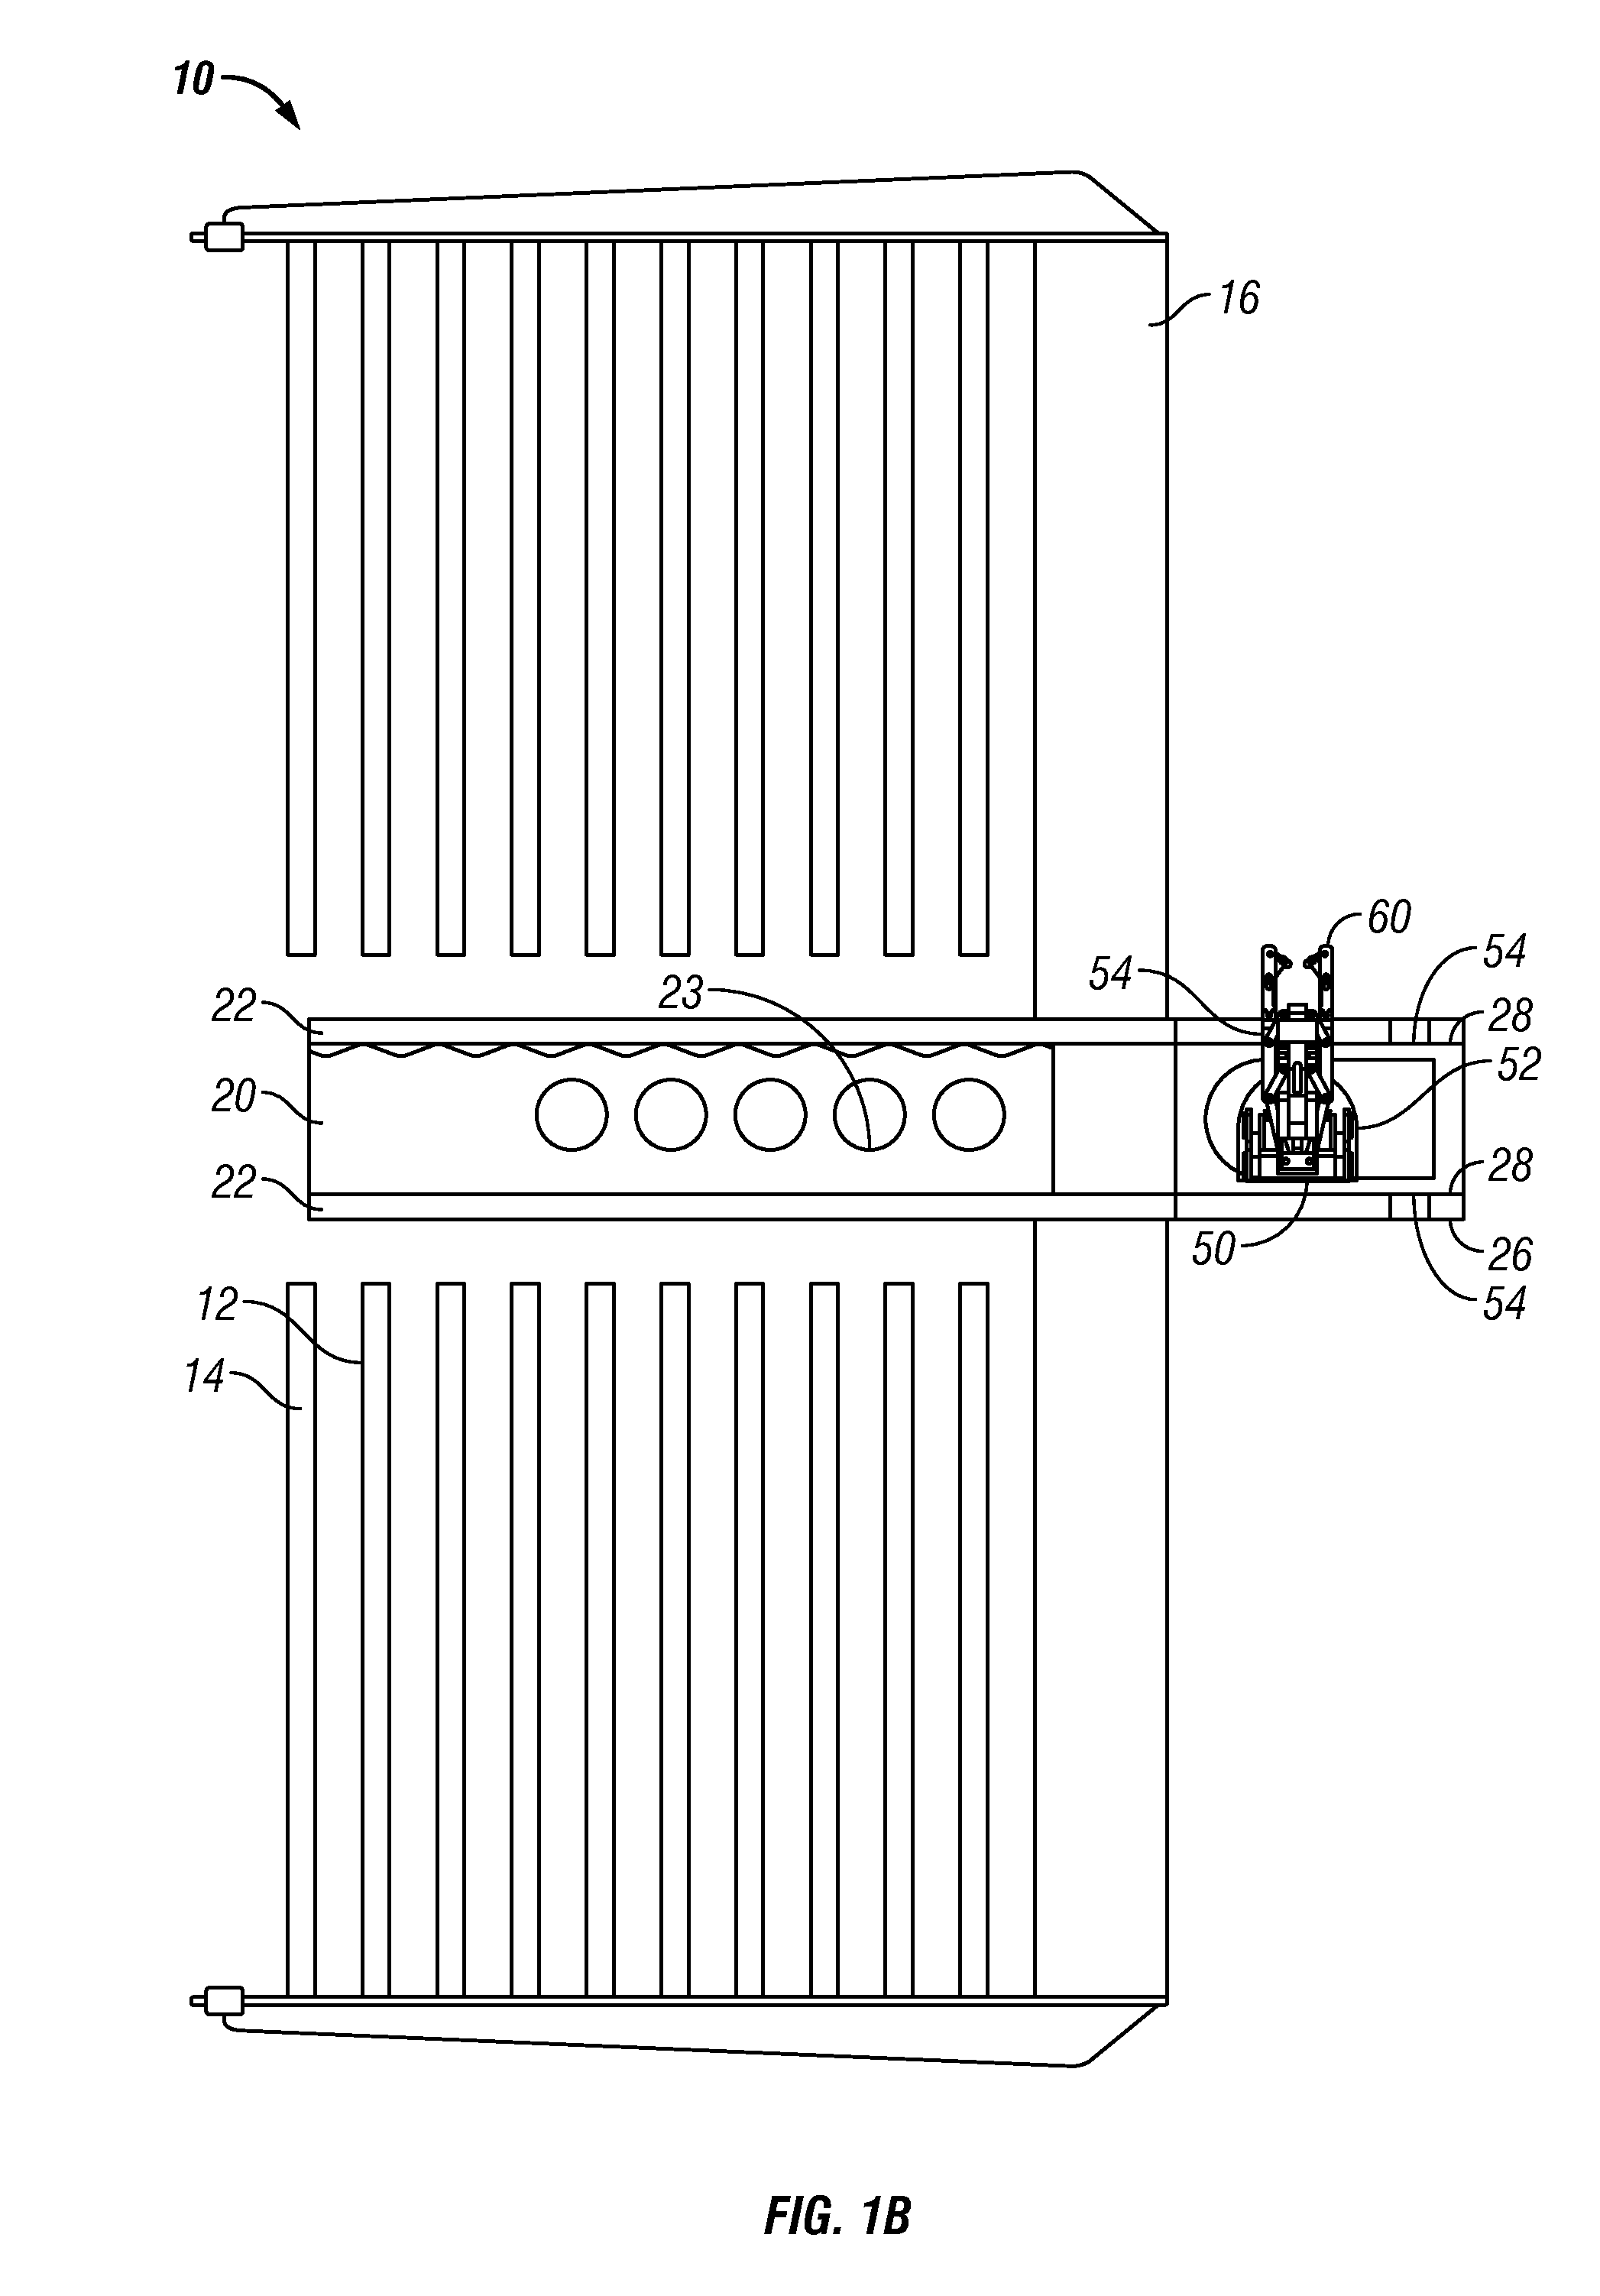 Pipe stand transfer systems and methods